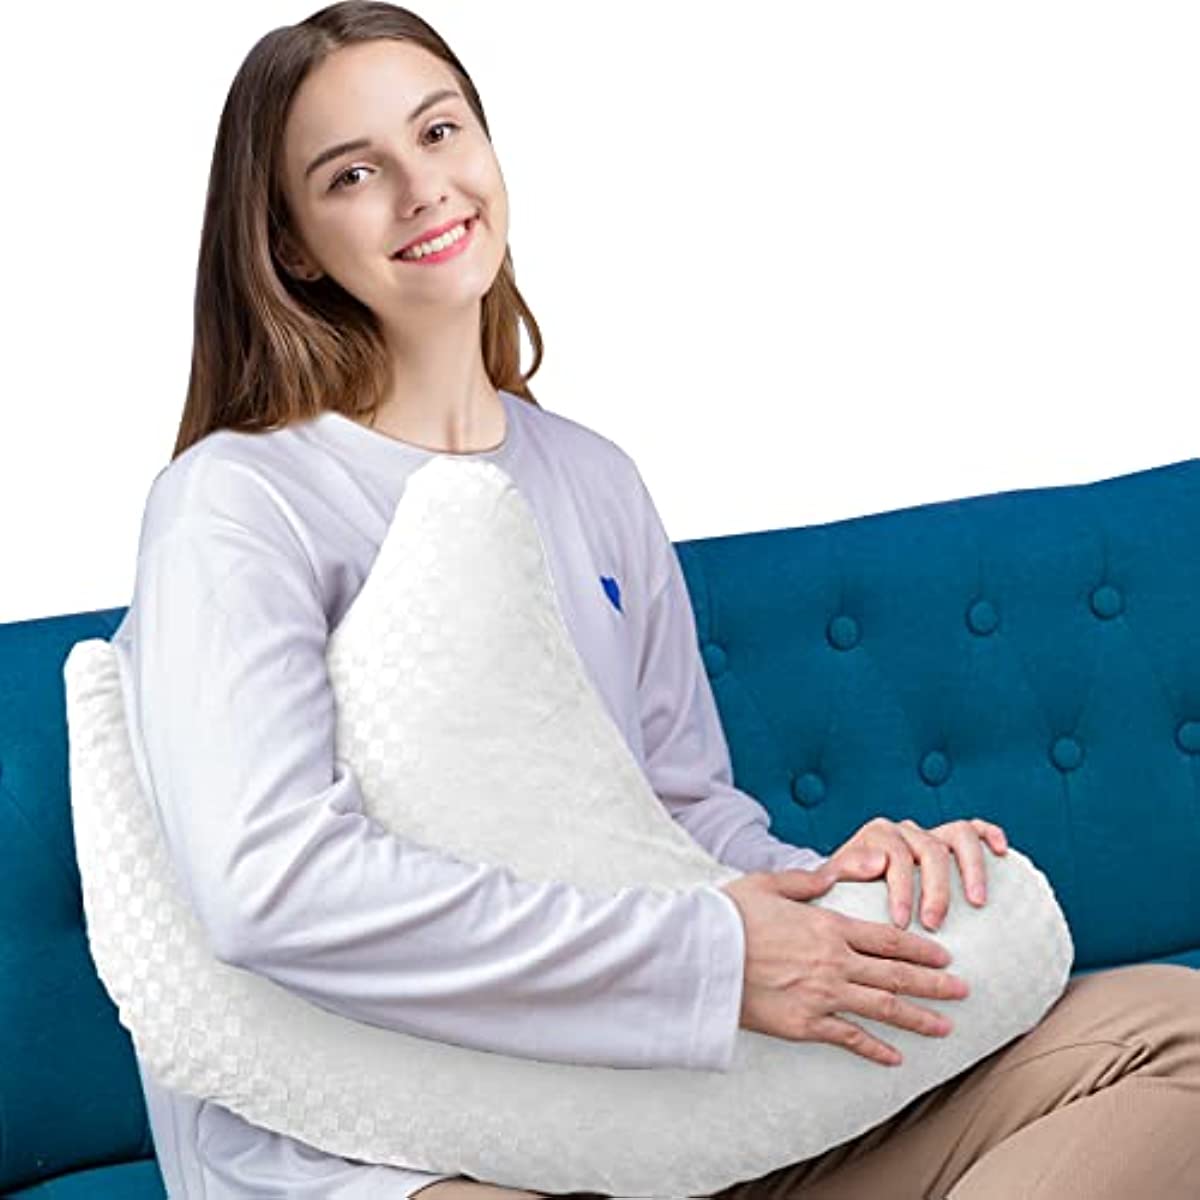 Shoulder Surgery Pillow/Rotator Cuff Pillow, Post Shoulder Pillow for Shoulder Pain Relief Side Sleeper, Adjustable Neck and Arm Pillow for Sitting & Sleeping (White)